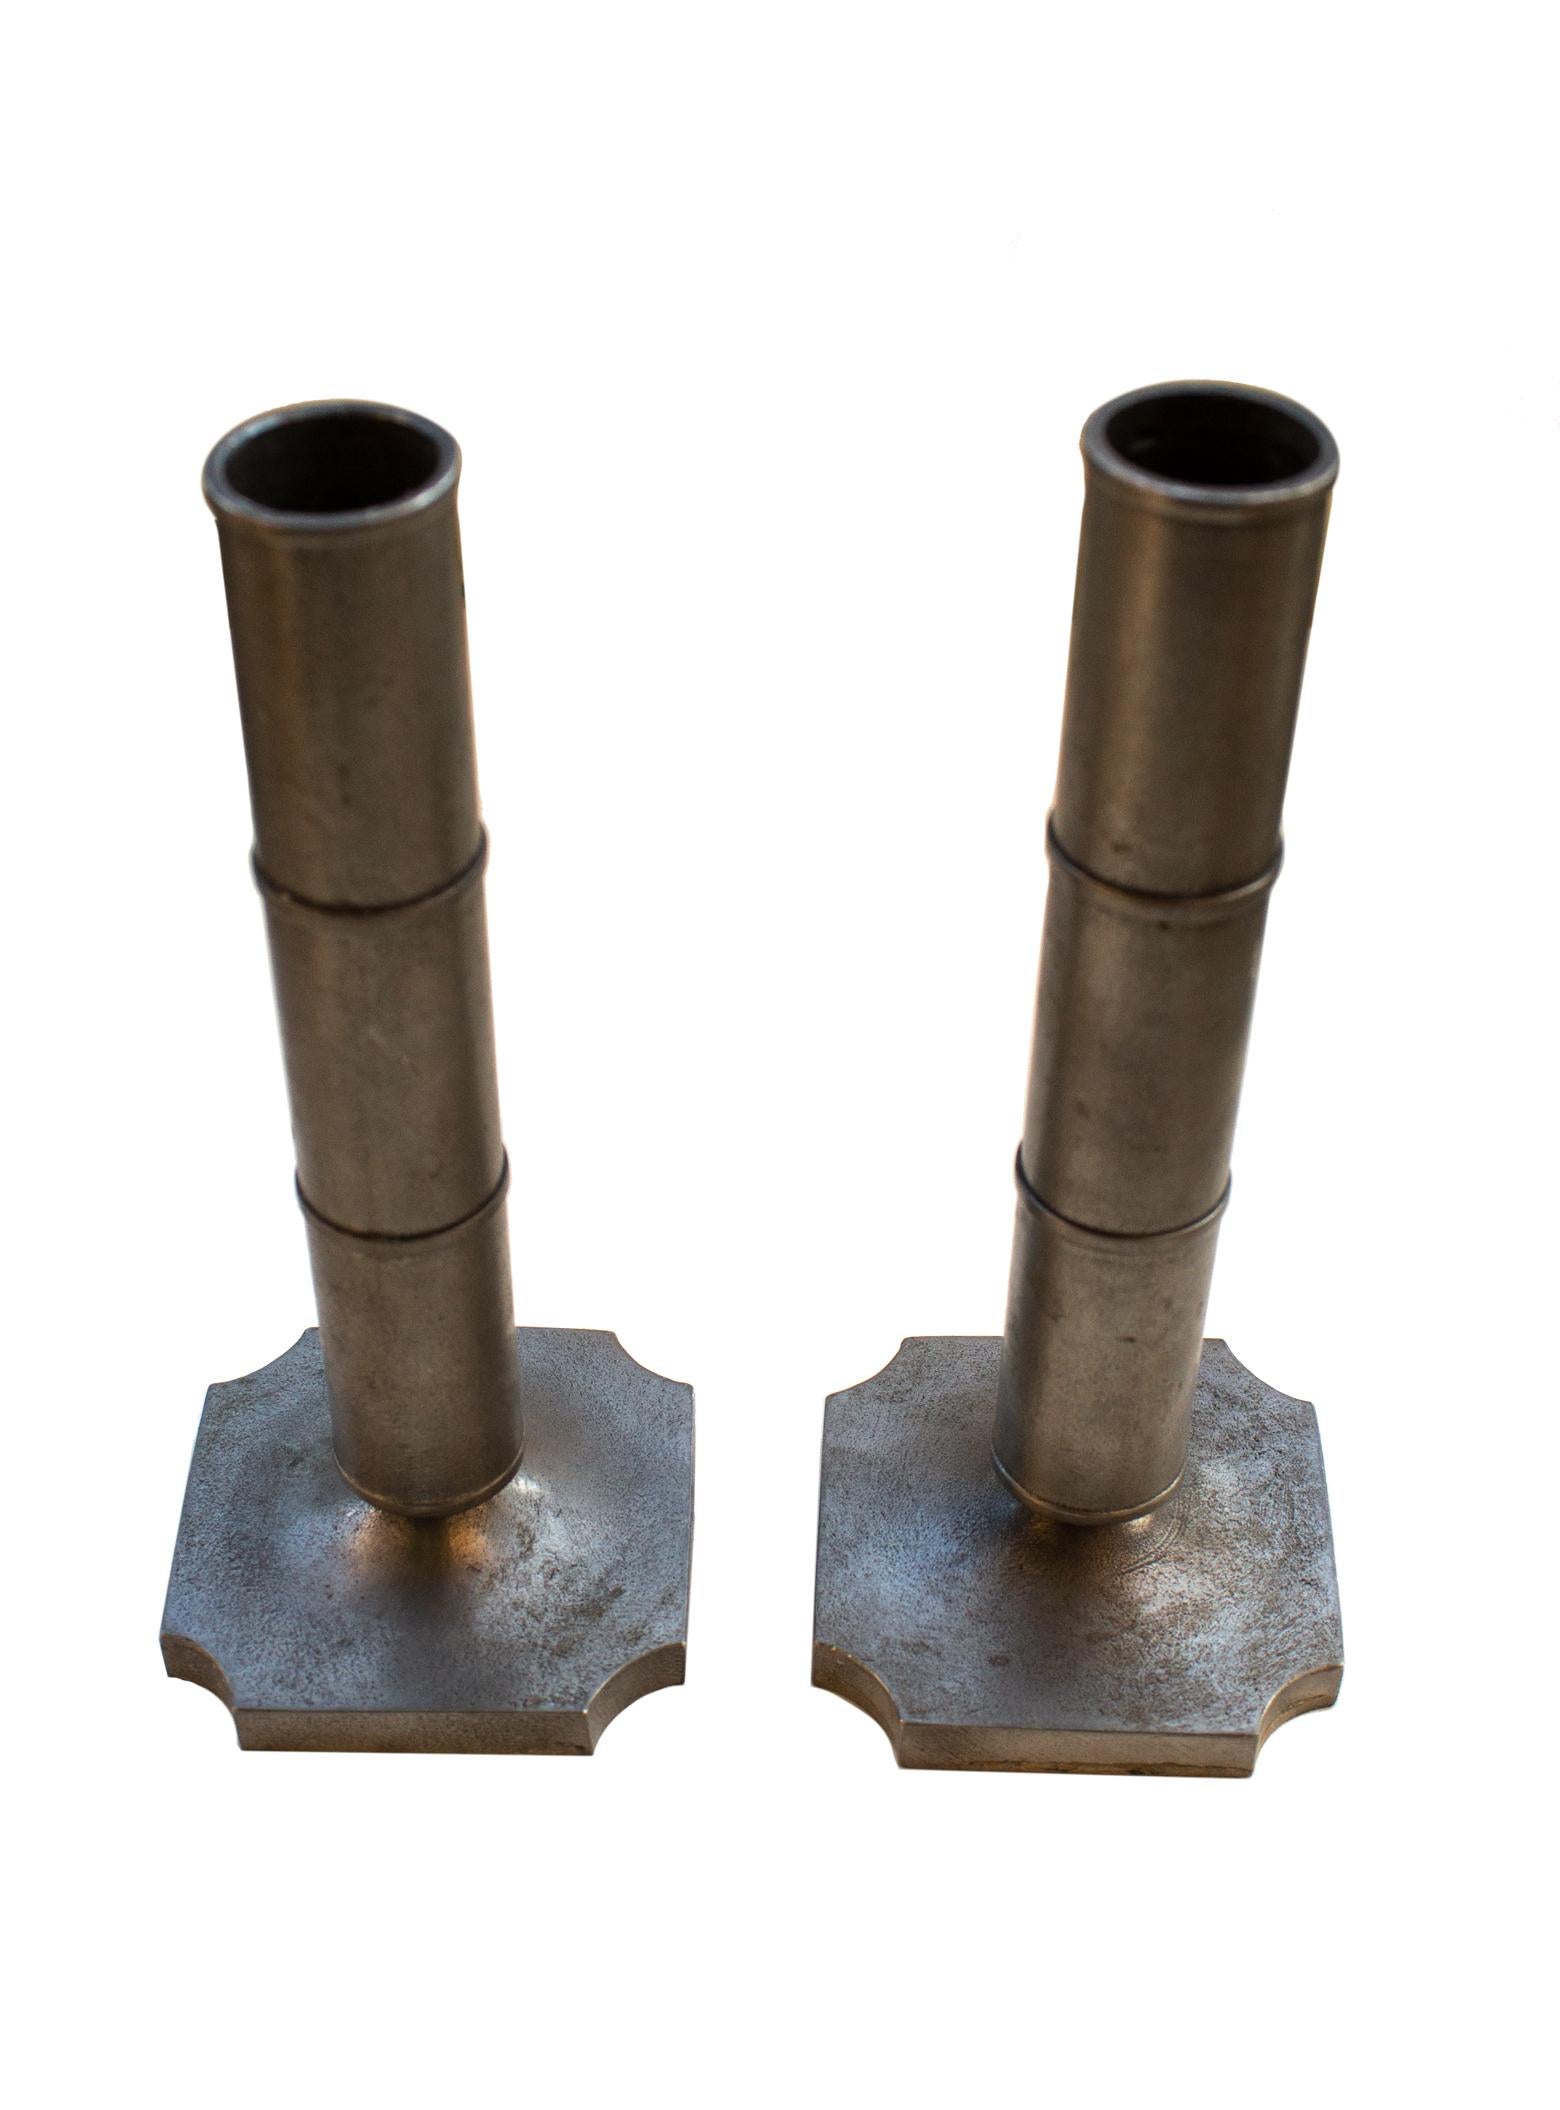 Pair of Scandinavian Modern candleholders in pewter by Edwin Ollers, Sweden in 1950s. Simple and sophisticated.
Stamped 